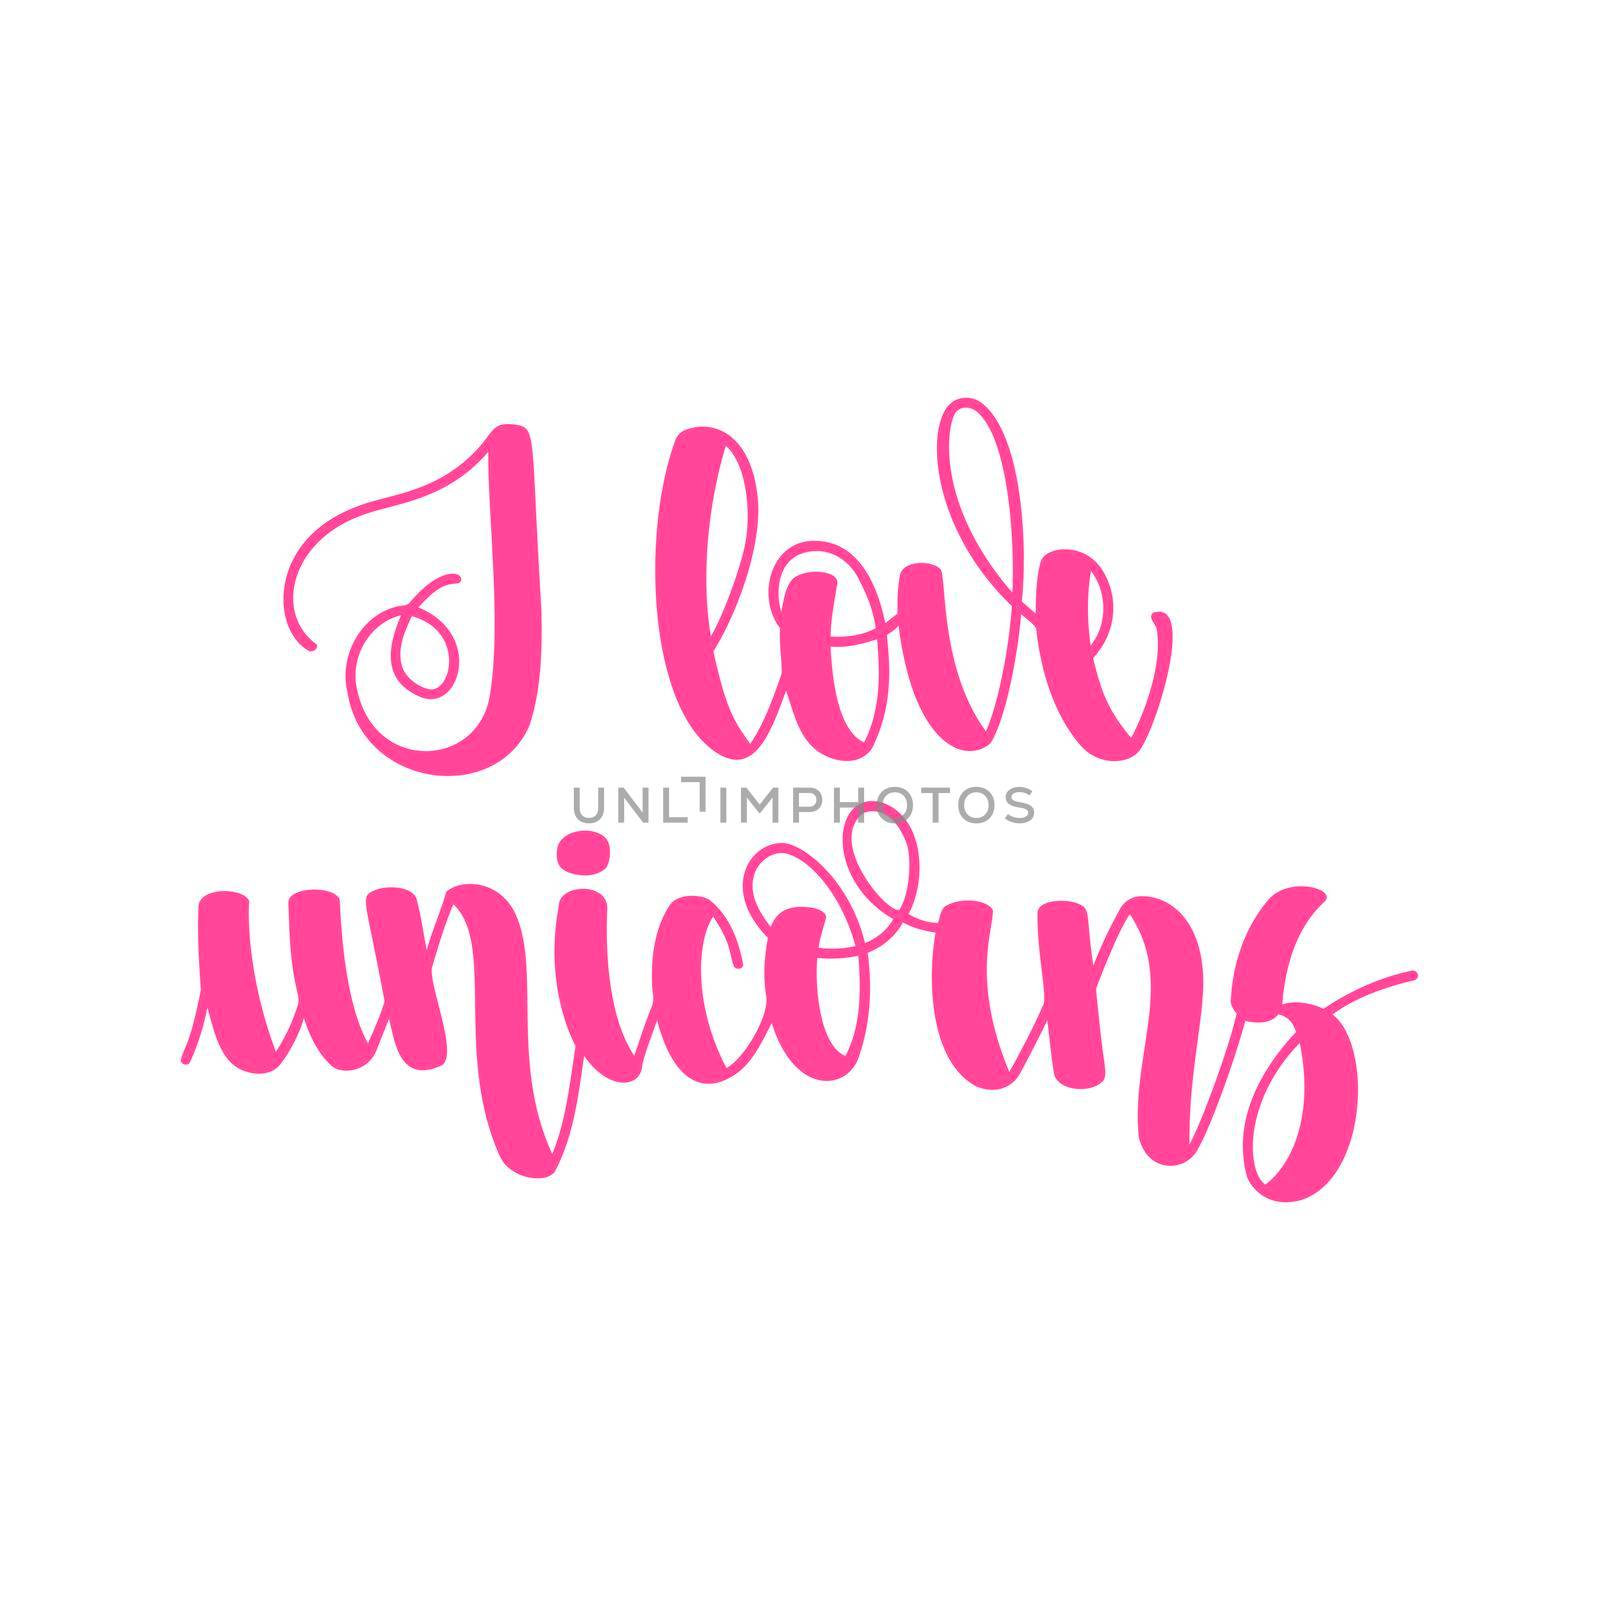 I love unicoI love unicorns. Handwritten lettering isolated on white background. illustration for posters, cards, print on t-shirts and much more.